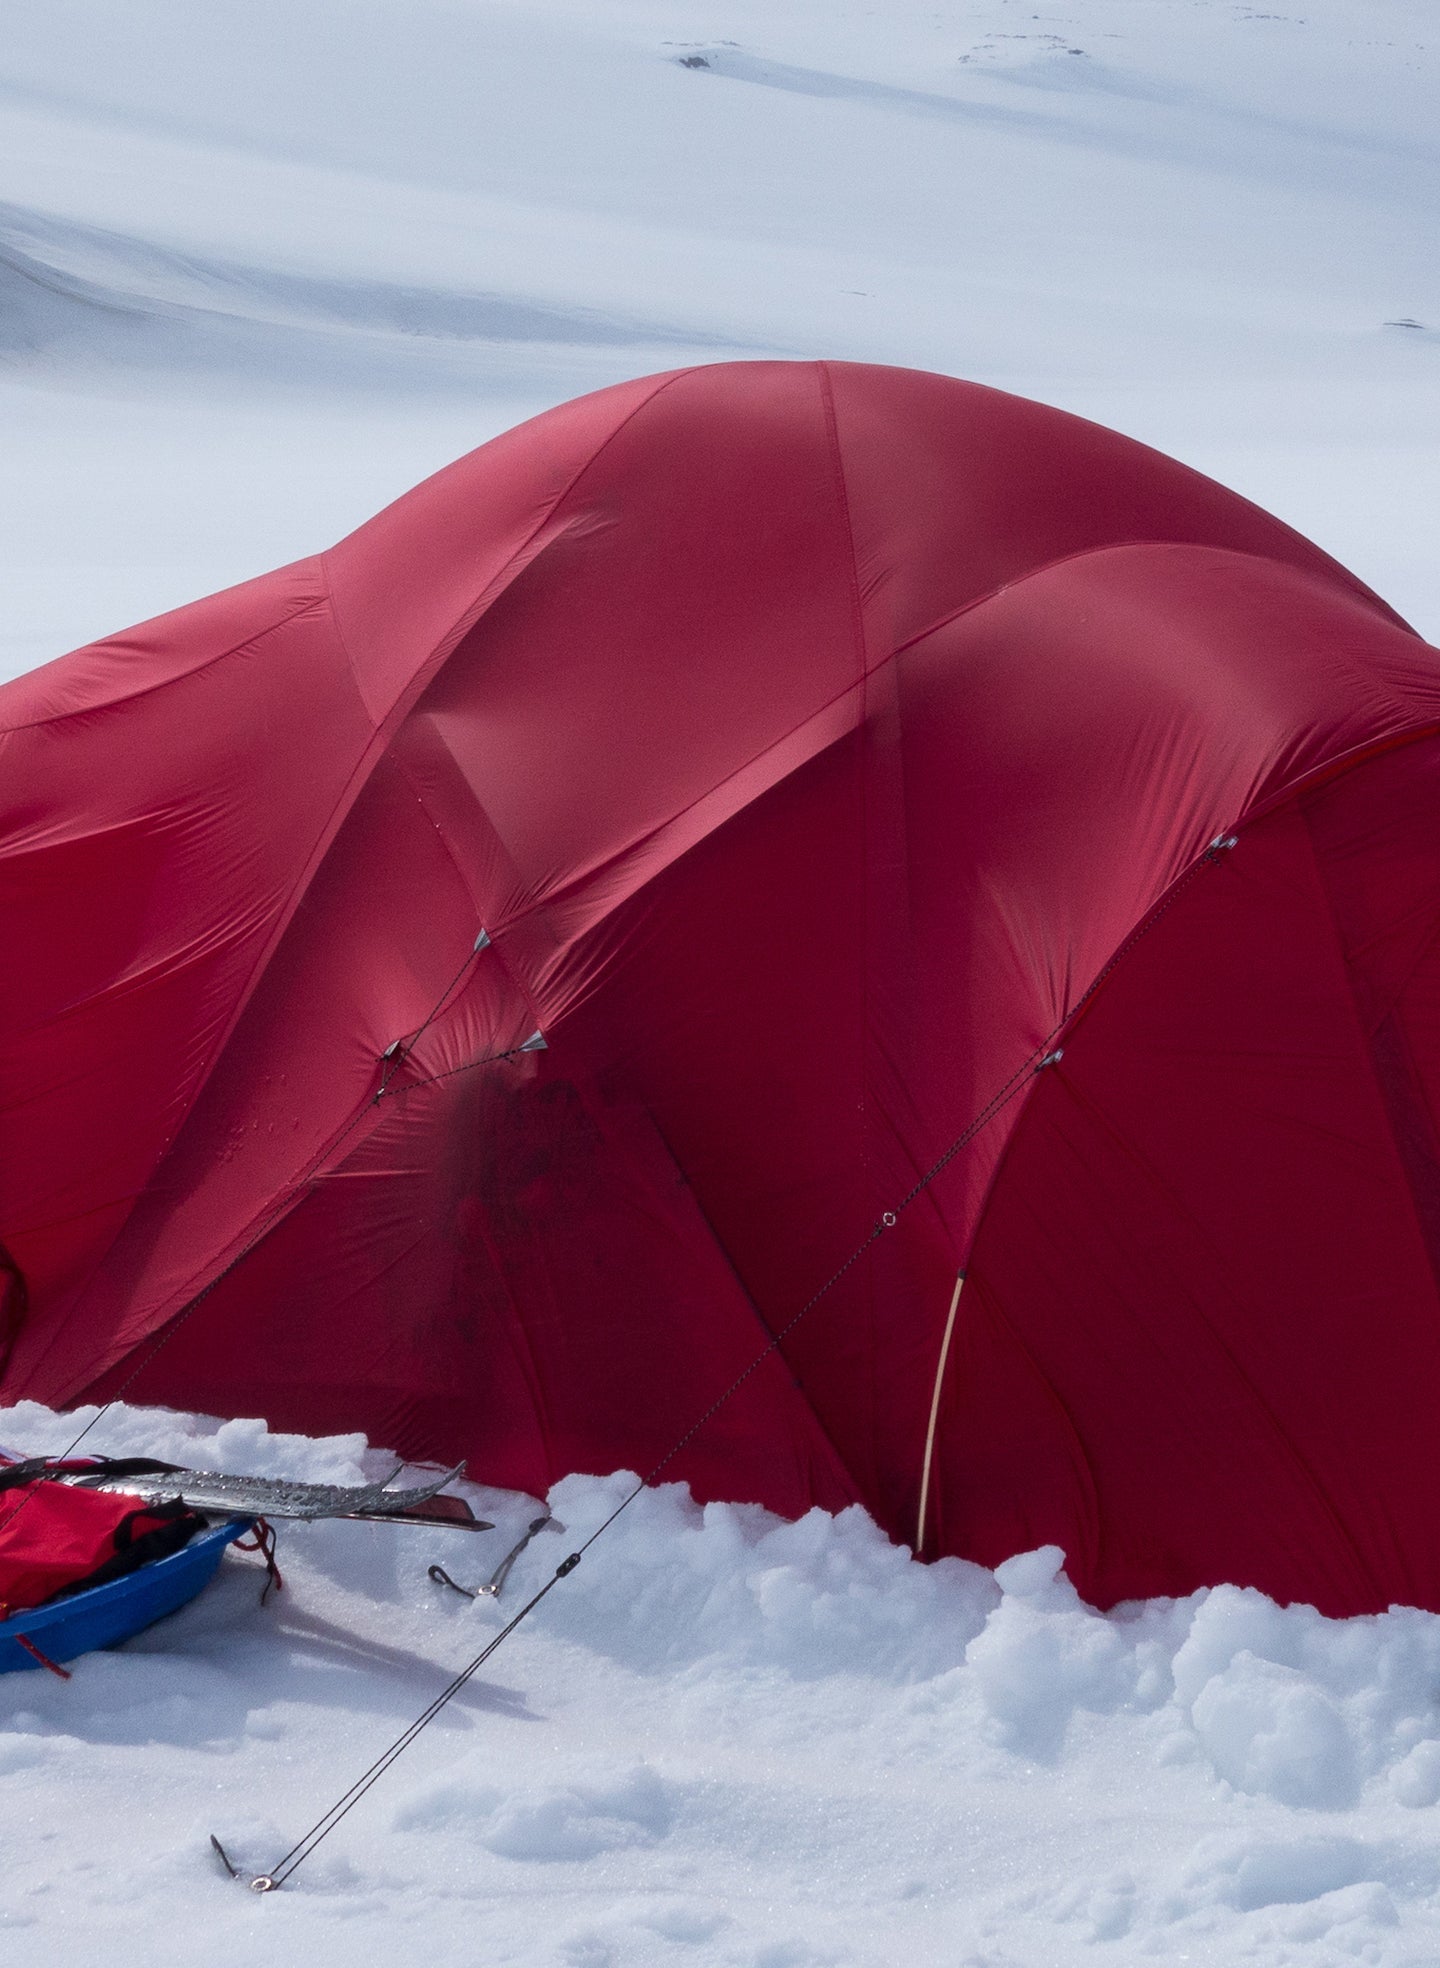 Overnight Winter Trips: Learn Winter Camping